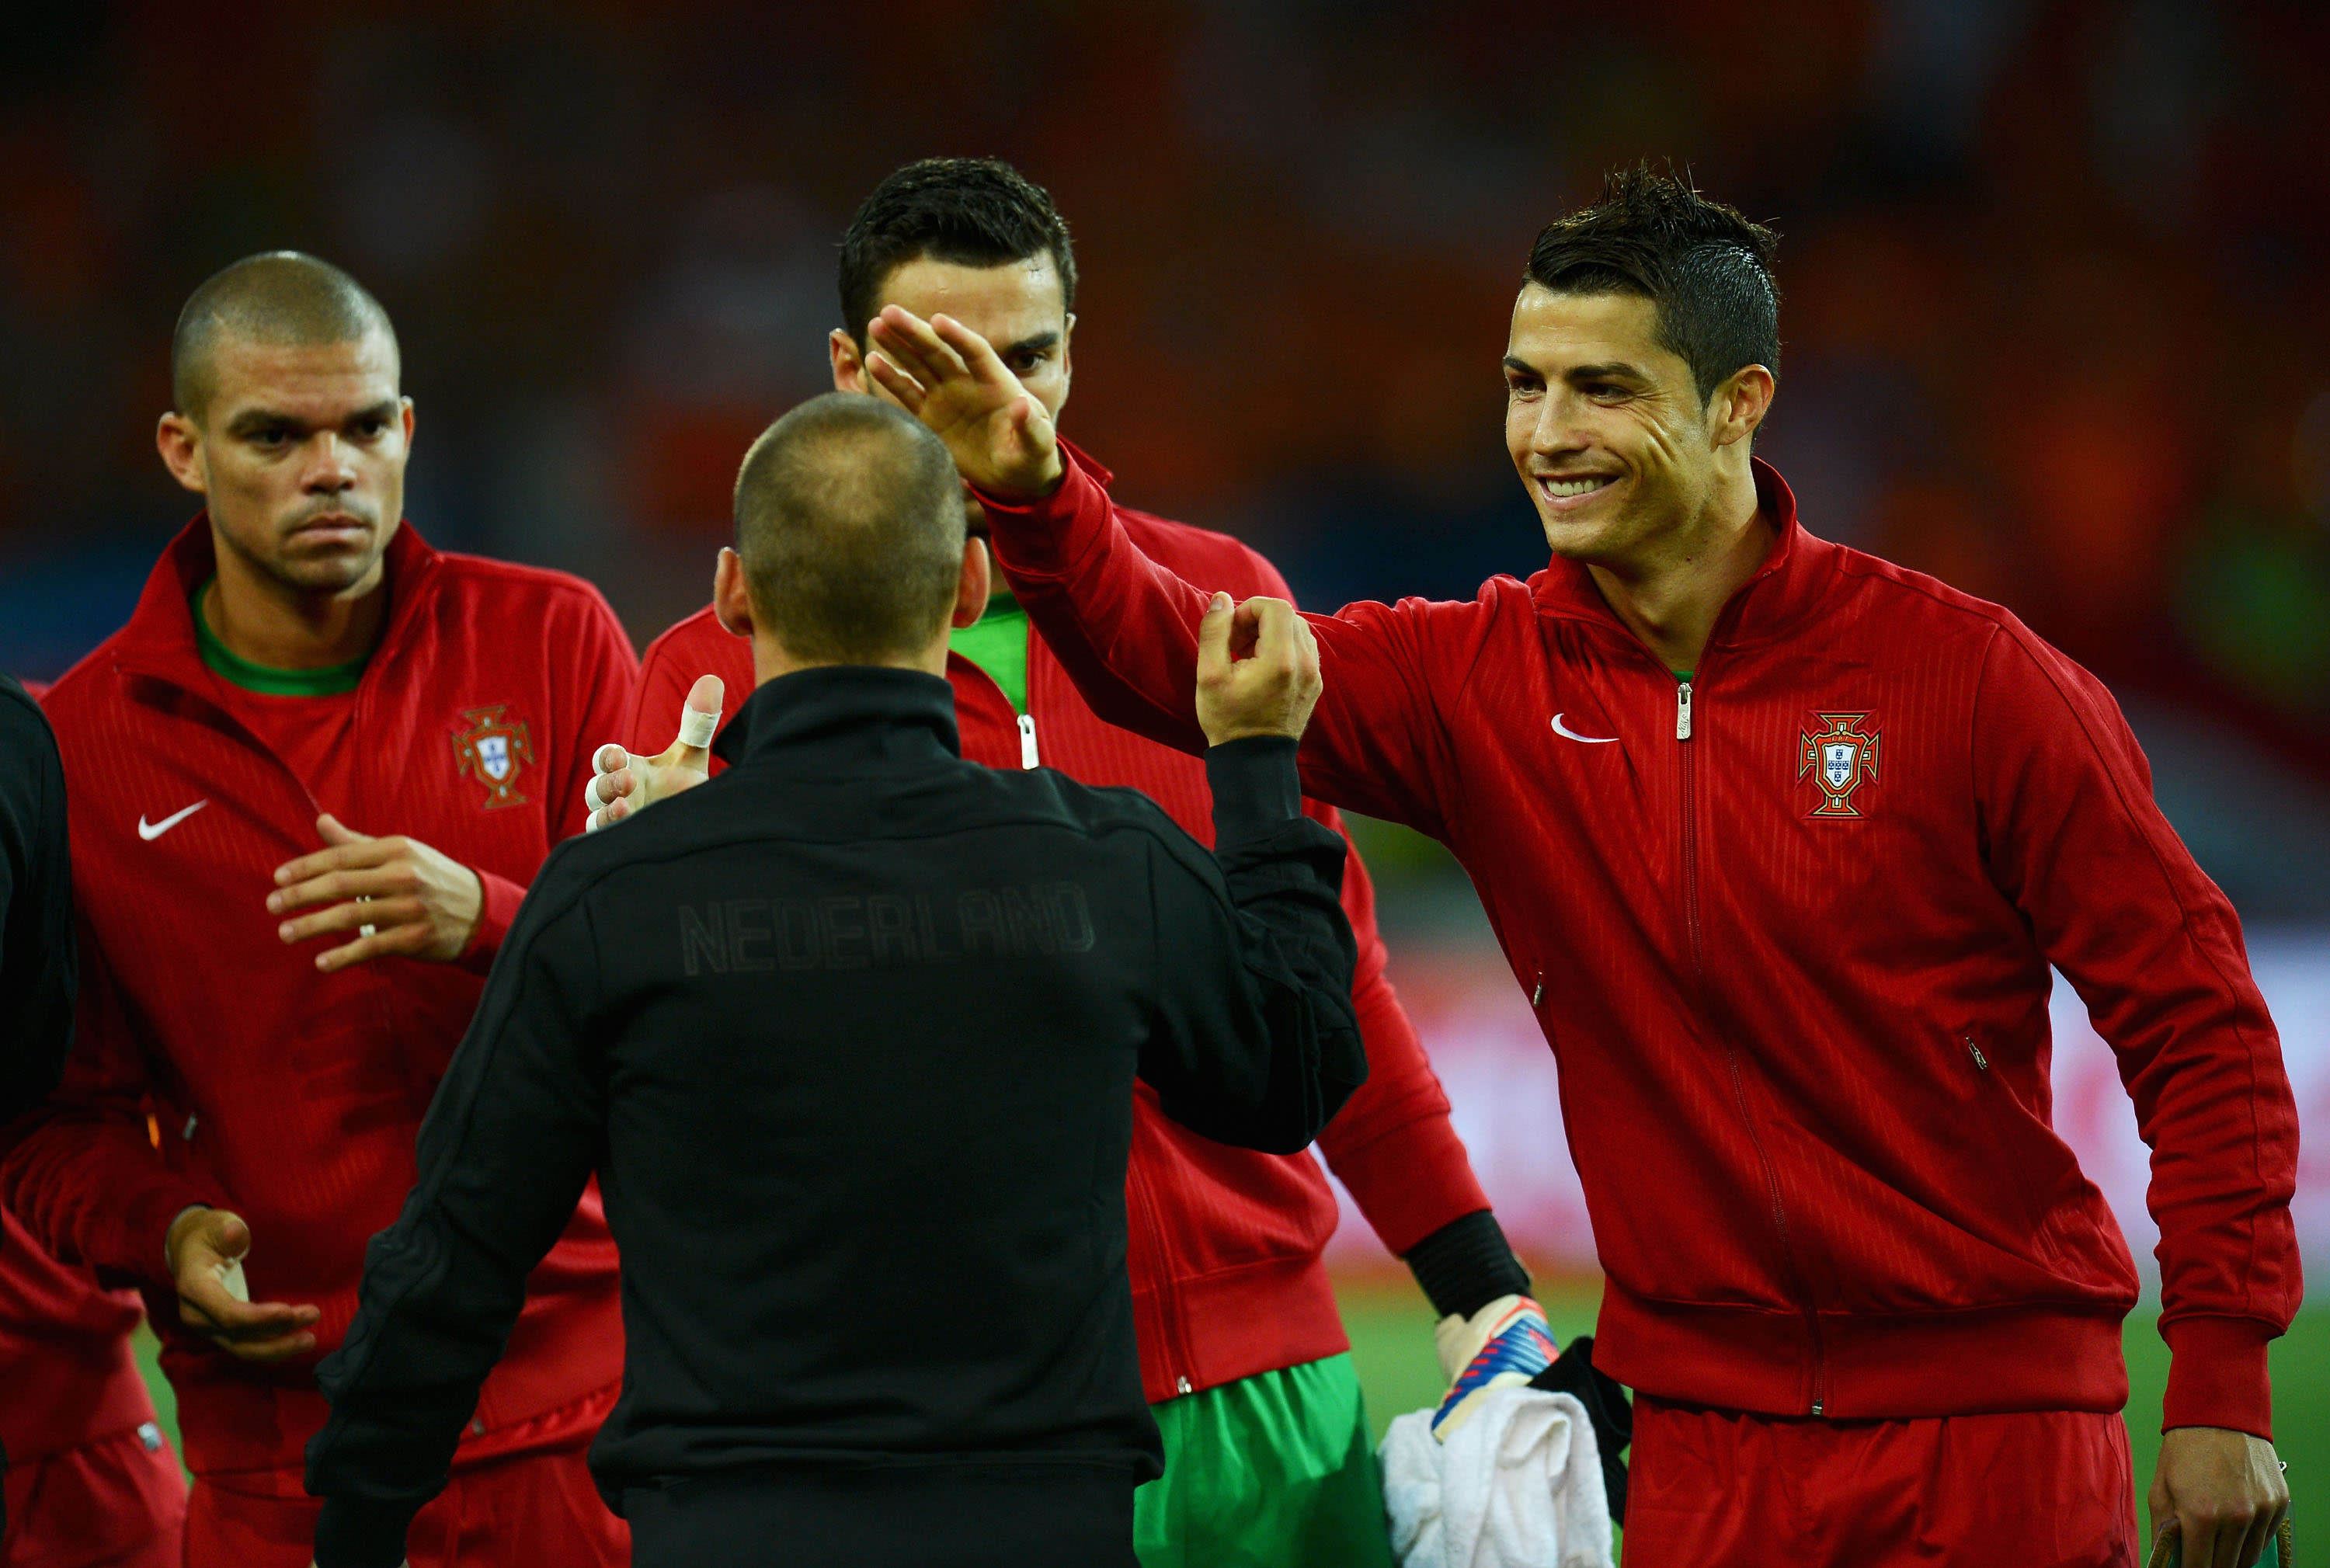 Portugal vs. Netherlands in Euro 2012 Group B action